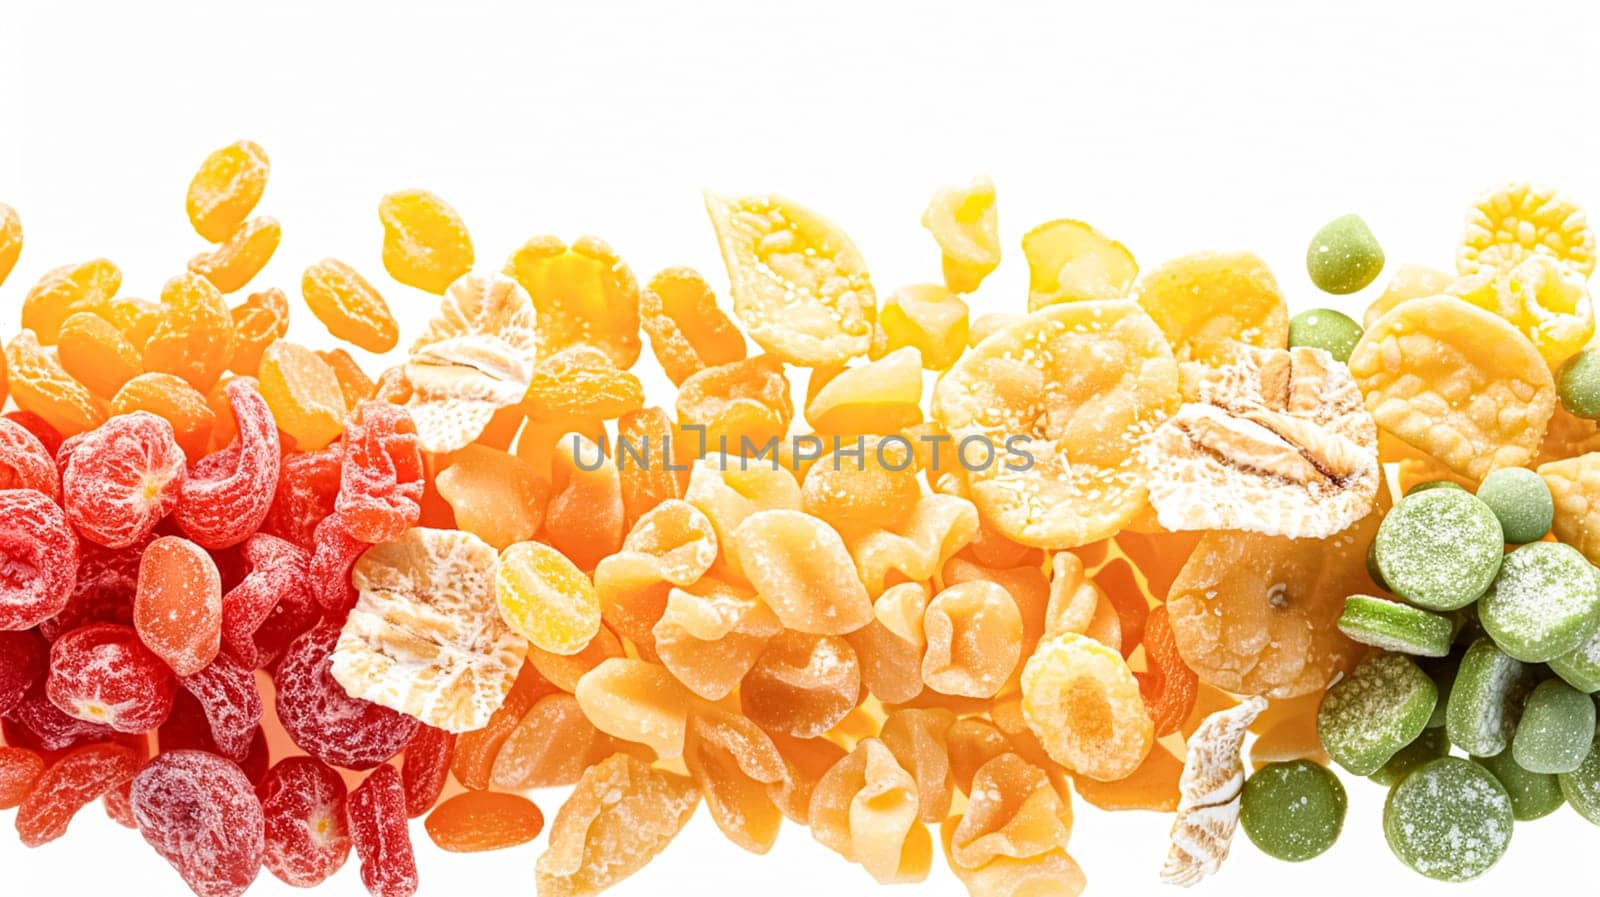 Assortment of cereal, grains, muesli or oats for healthy breakfast, organic farm market product isolated on white background by Anneleven